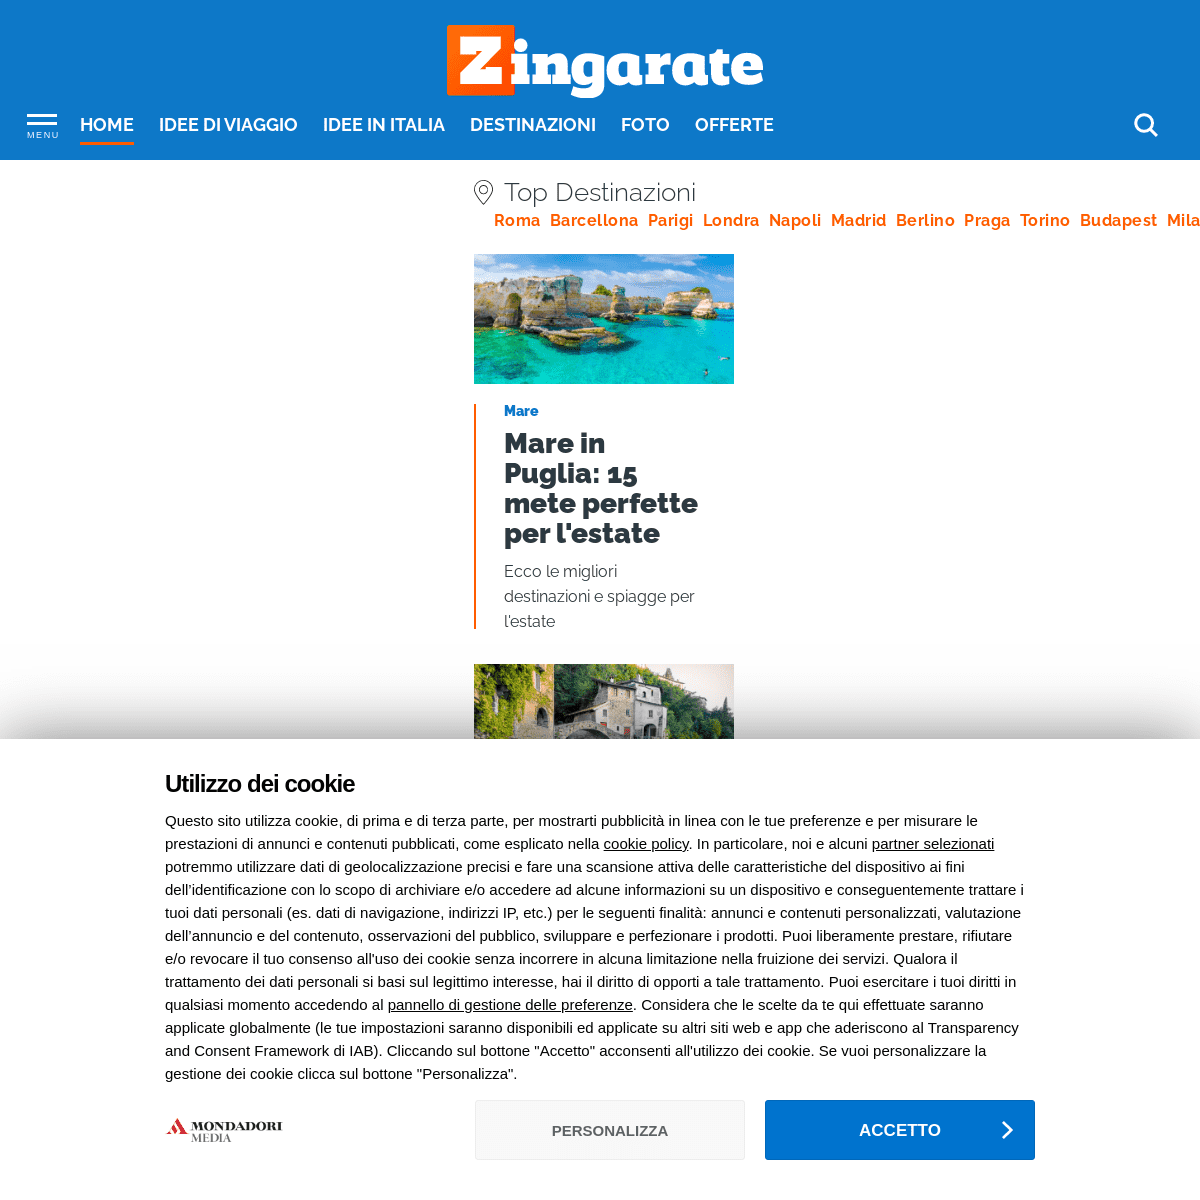 A complete backup of https://zingarate.com